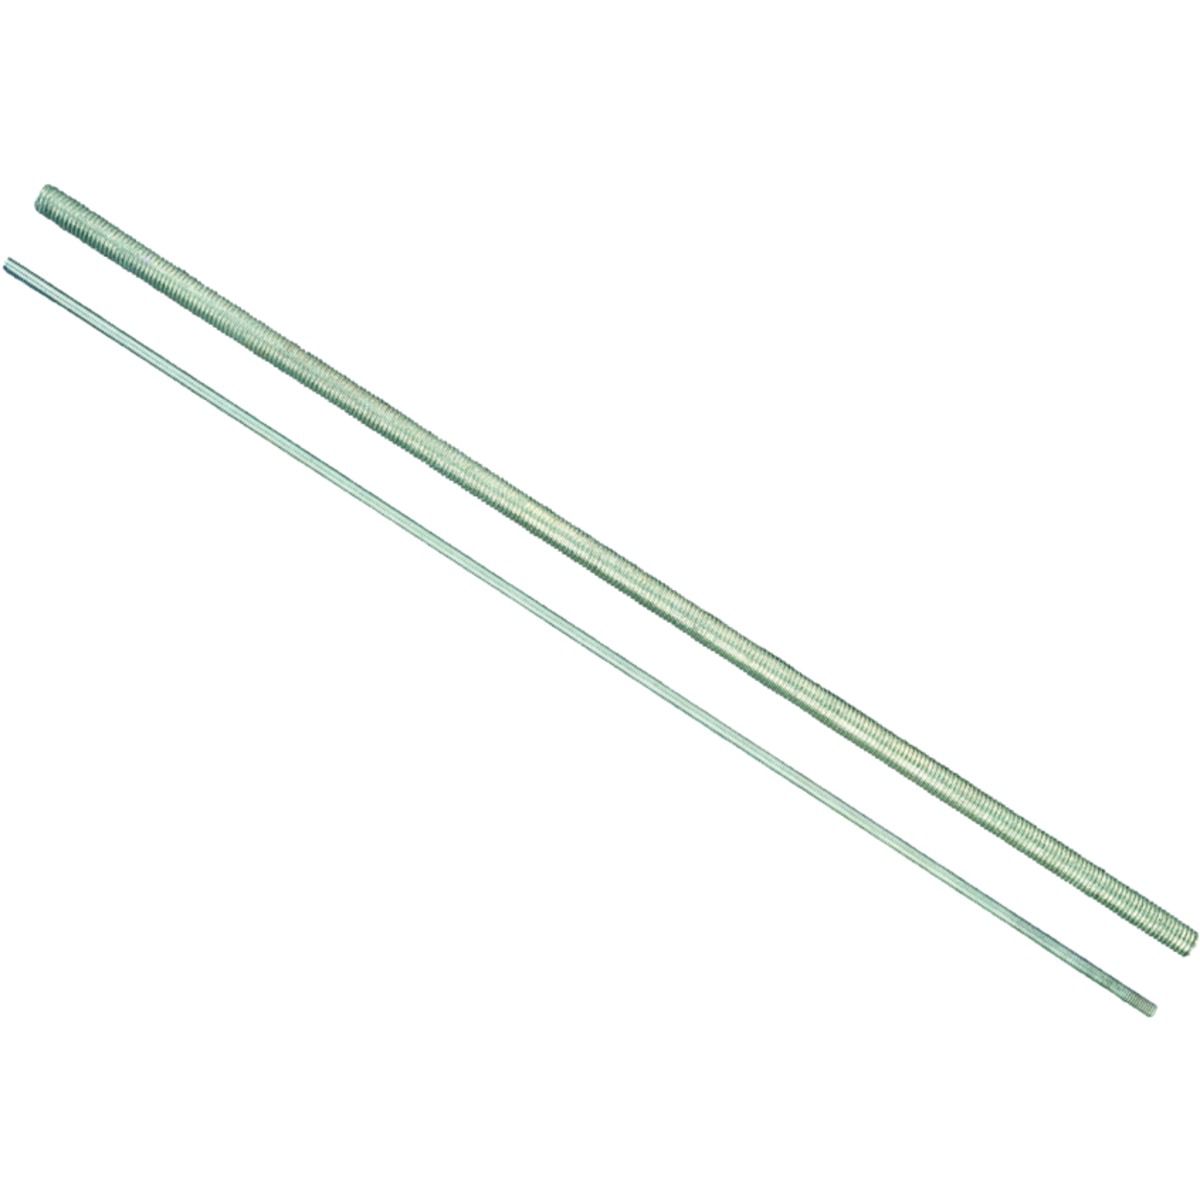 Image of Fischer Principle Threaded Rods - M10 Pack of 2